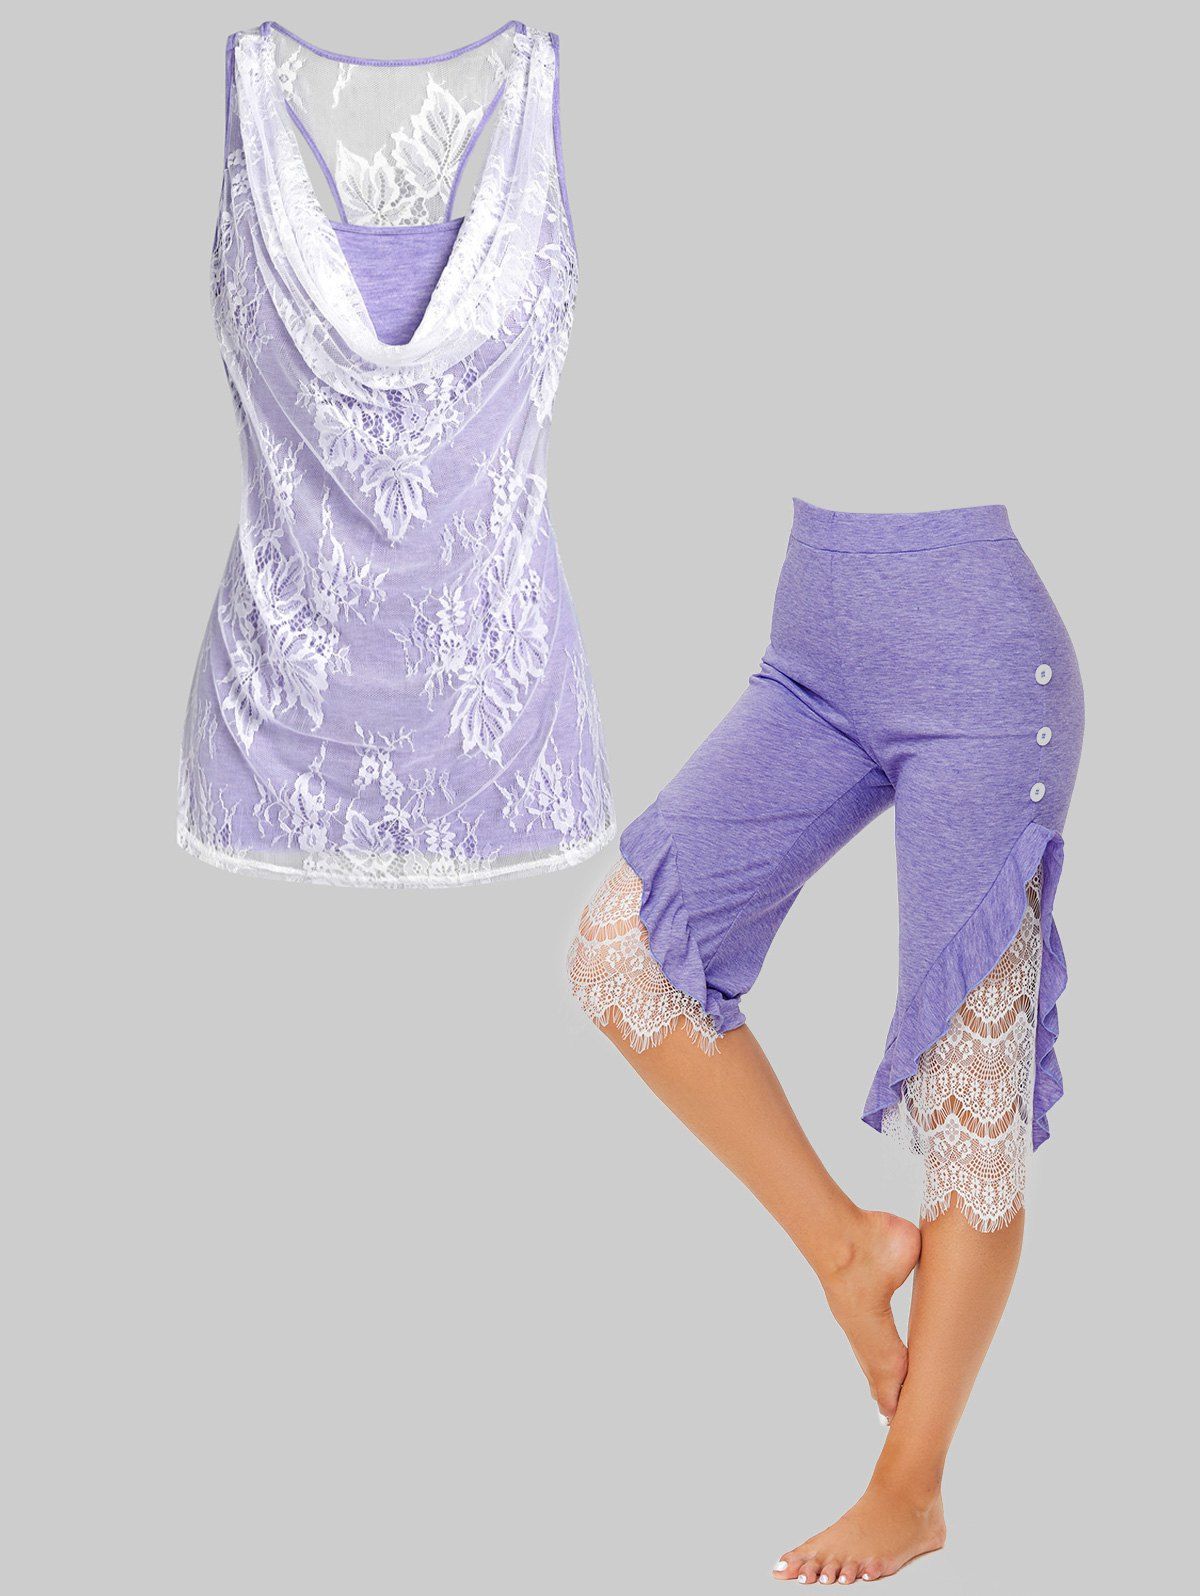 Flower Leaf Lace Overlay Tank Top and Ruffle Lace Panel Crop Pants Outfit - LIGHT PURPLE S